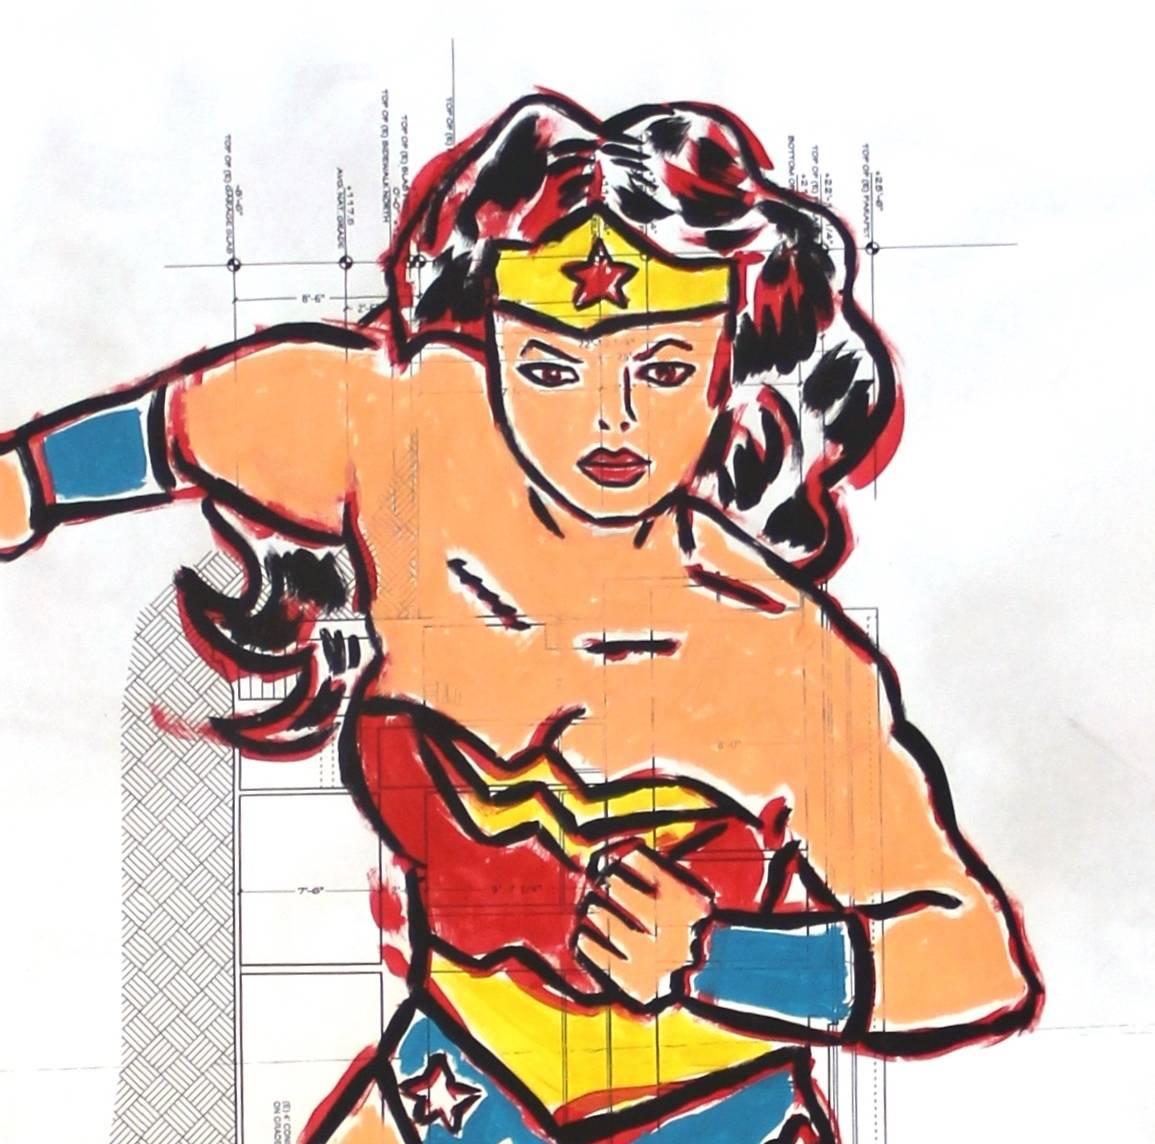 Go Wonder Woman! - Large Mixed Media Artwork on Architectural Paper 3